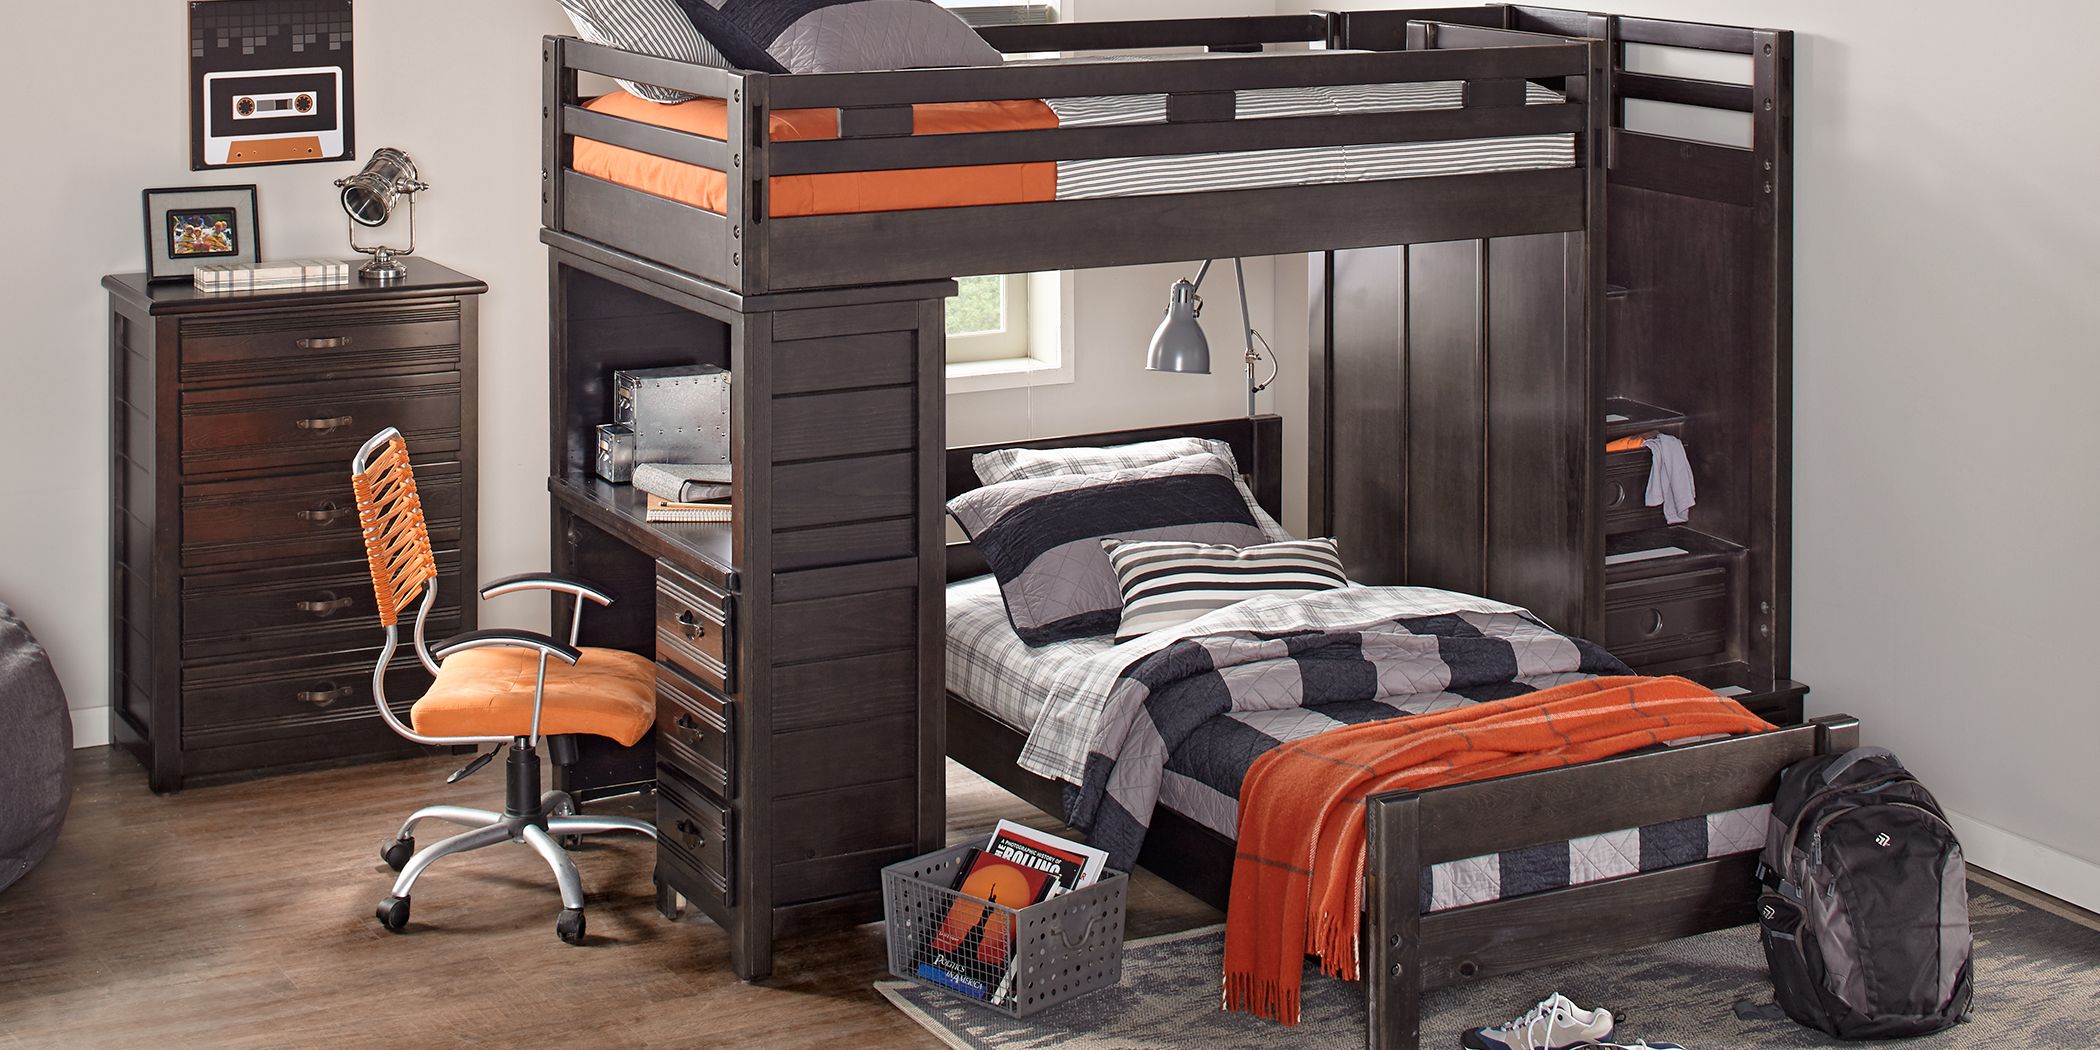 Creekside Furniture Collection Bunk, Canyon Creekside Bunk Bed